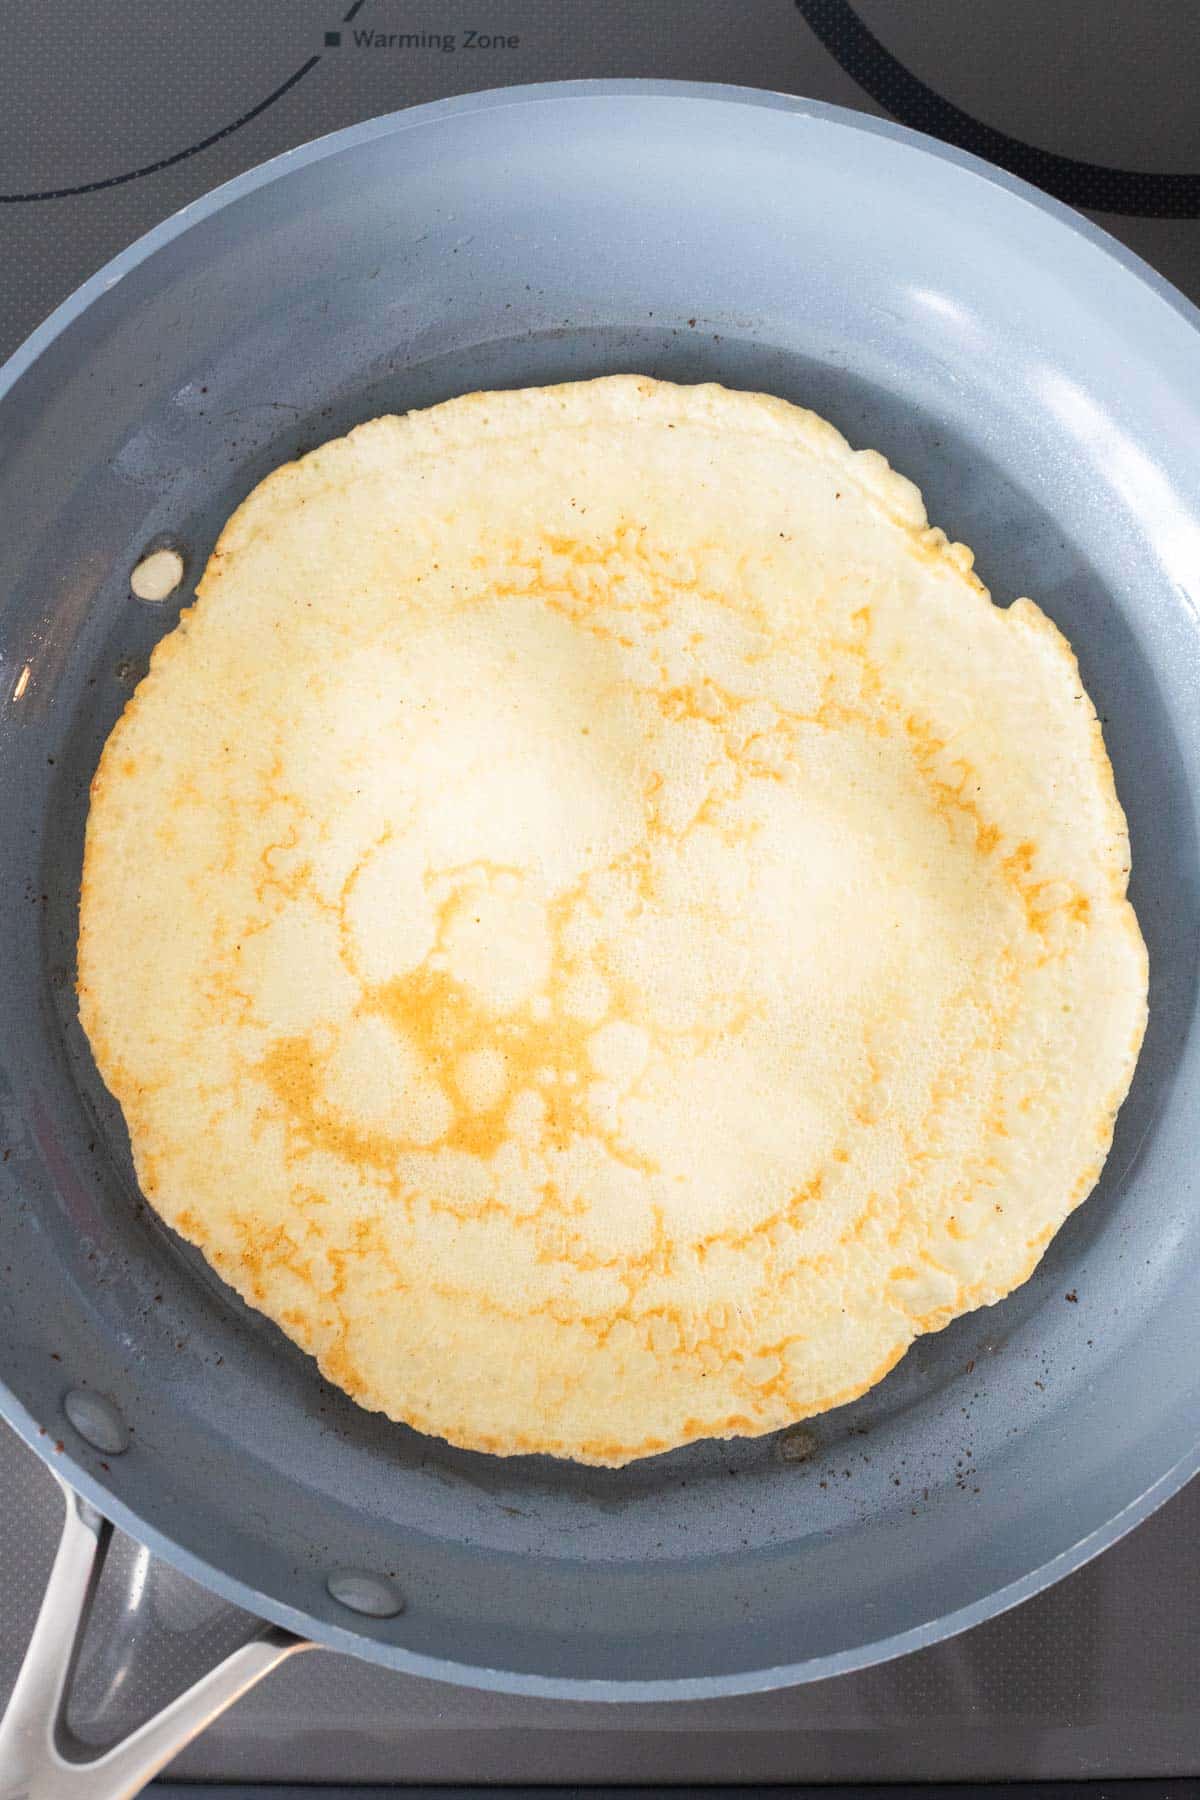 The pancake in a pan after flipping it.